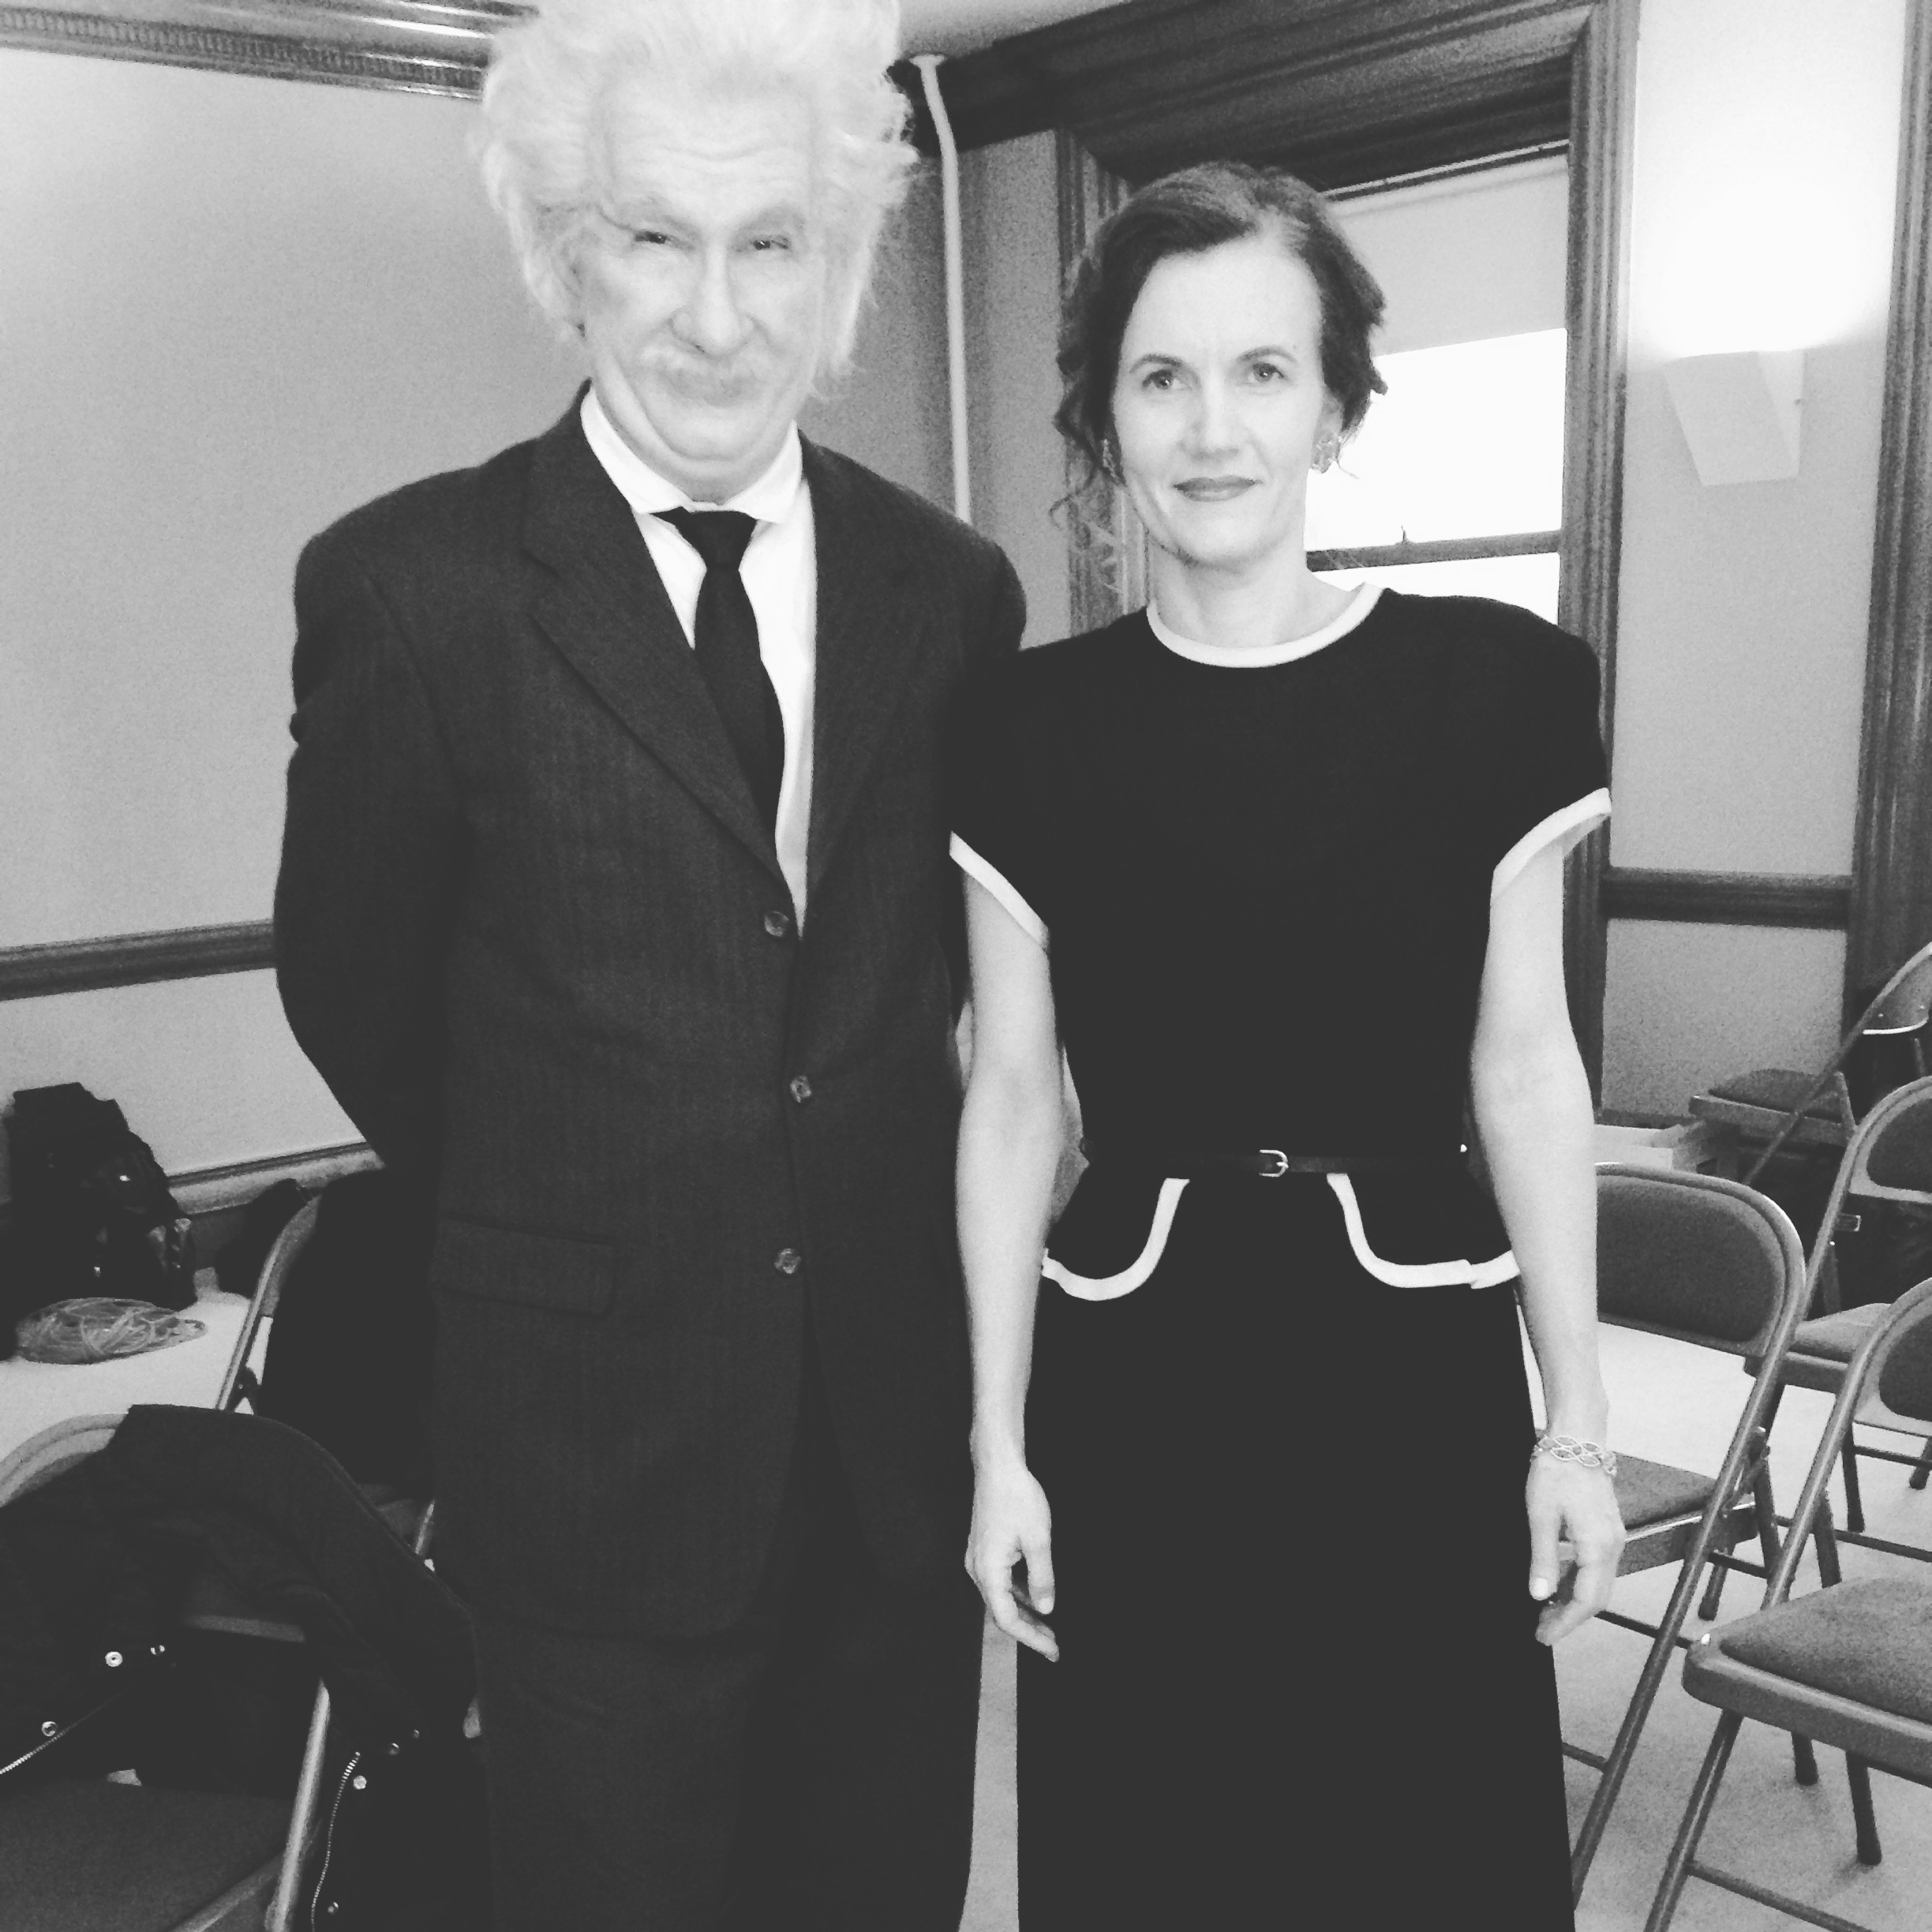 Einstein and Margarita Konenkova, played by Trace Beaulieu and Kirsten Gregerson for History Channel Special that aired November 2, 2015. Directed by Ben Krueger